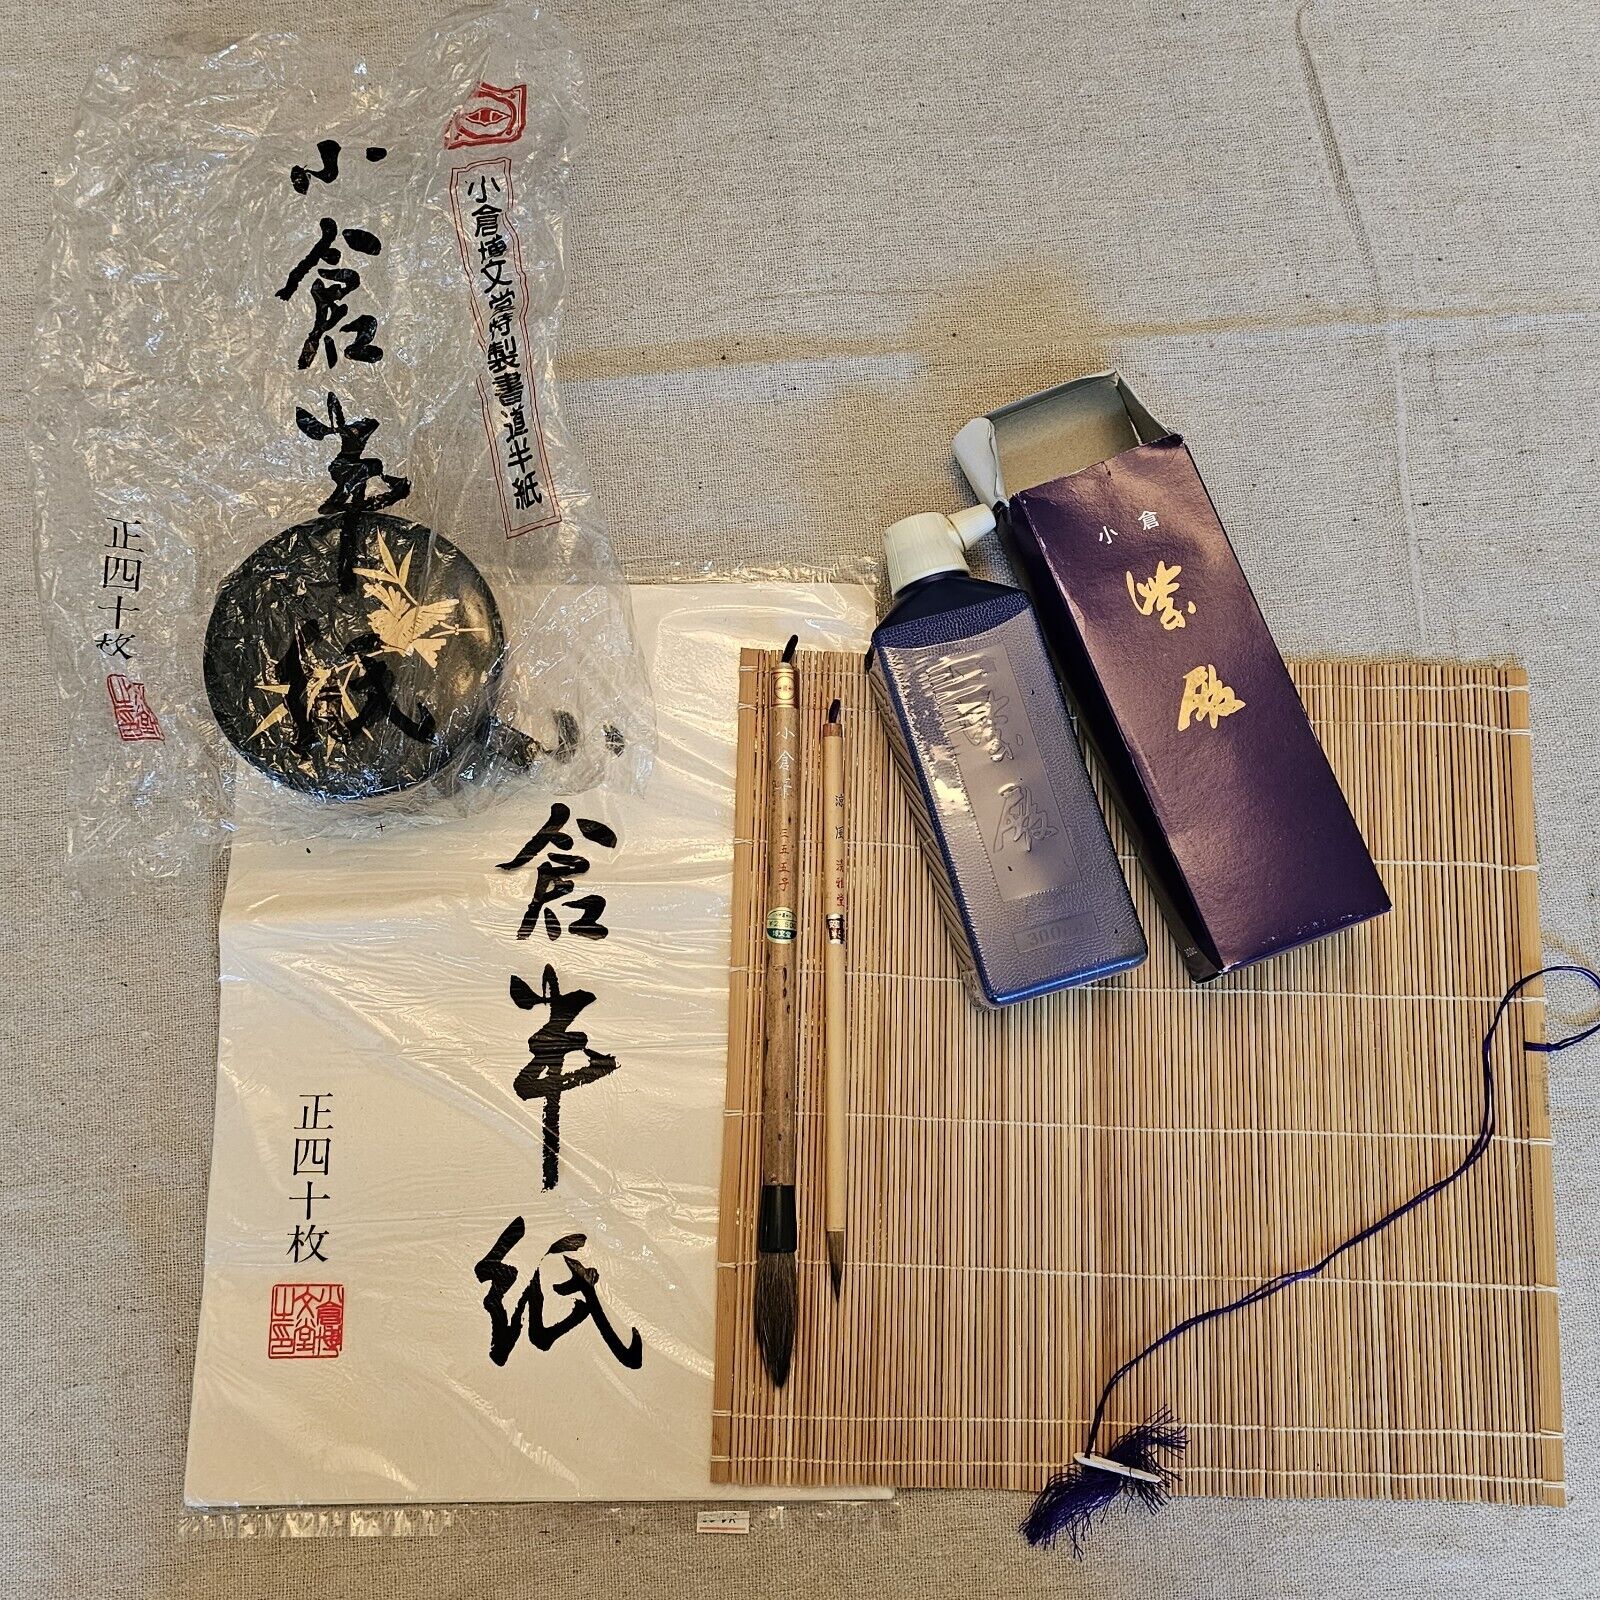 Vintage Japanese Calligraphy Lot Brushes Appear Lightly Used Everything Else New